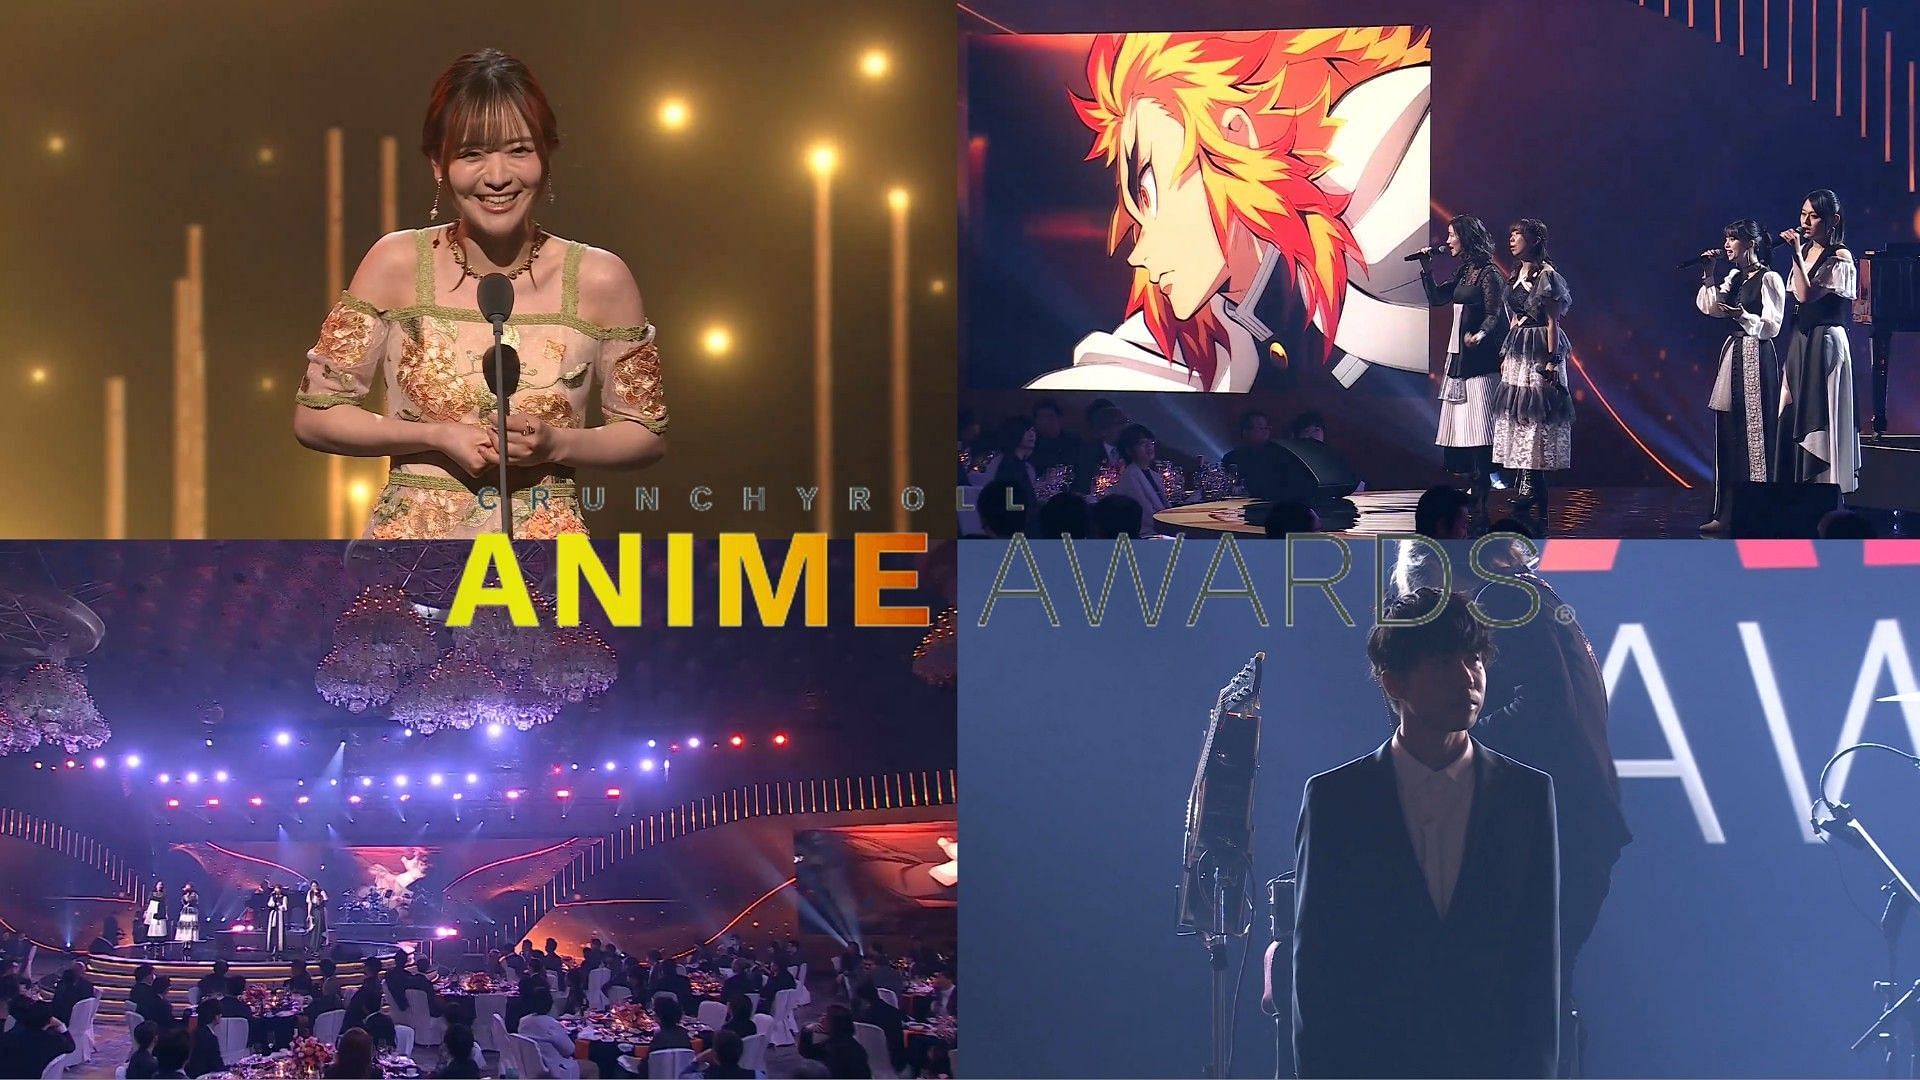 What are your predictions for The 3rd Crunchyroll anime Awards? - Quora